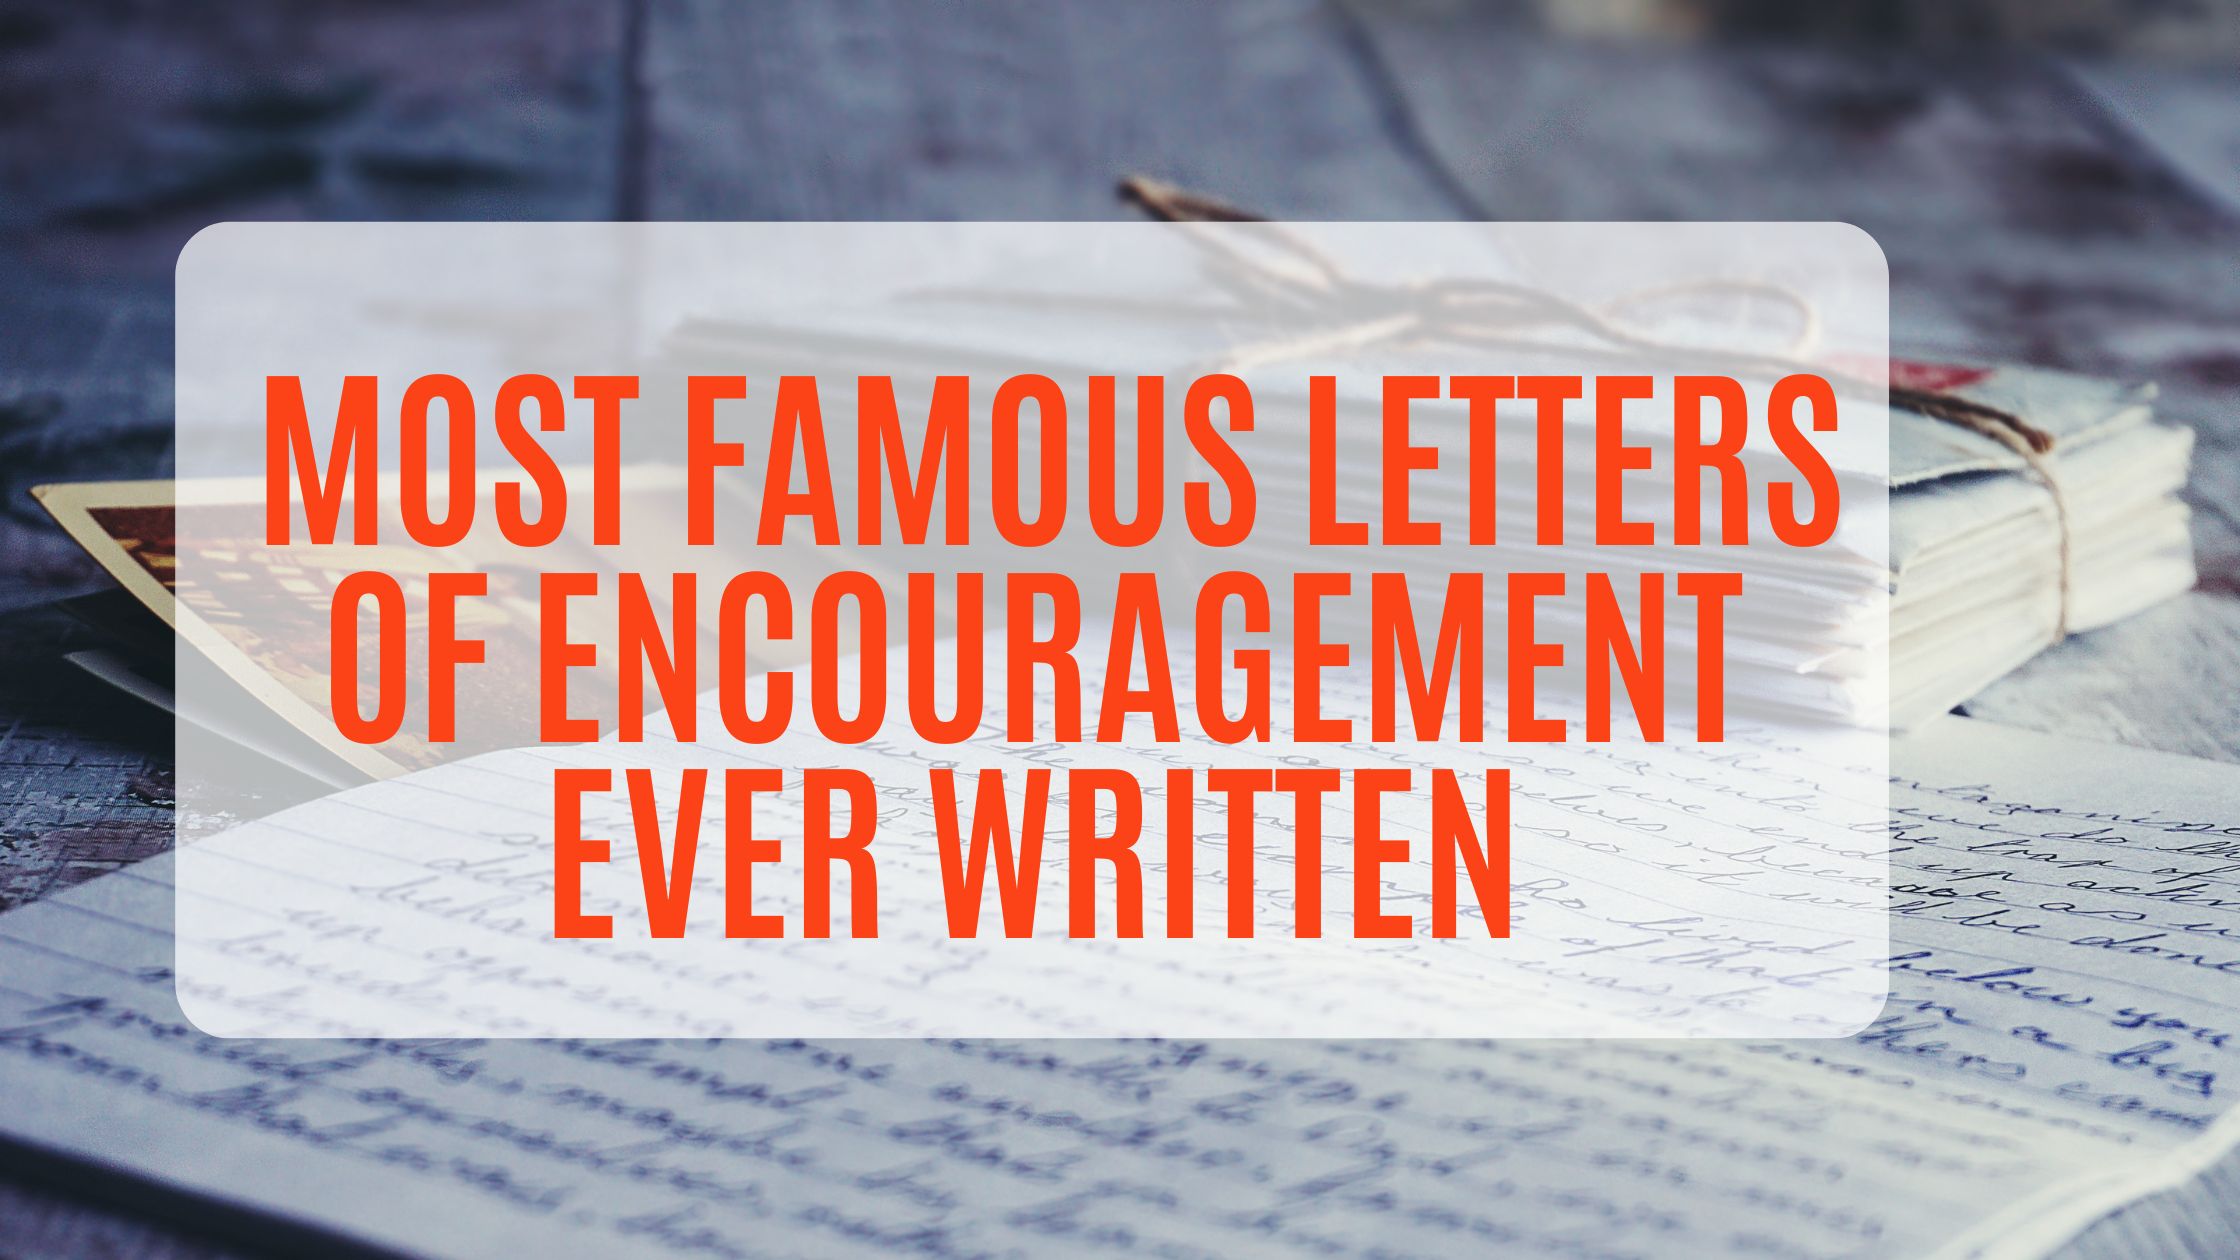 Most famous letters of encouragement ever written